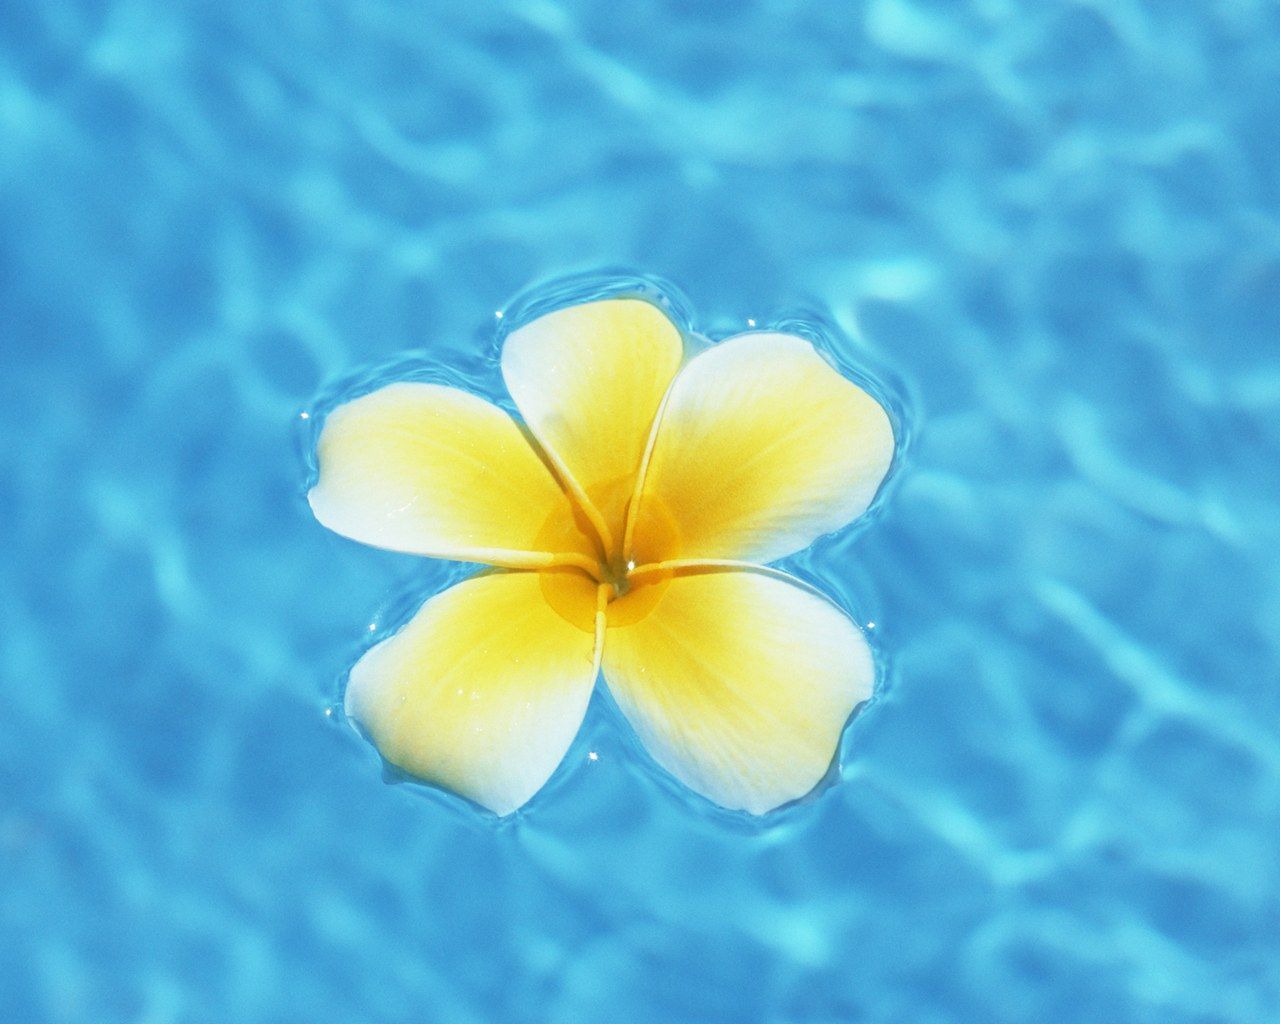 Hawaiian Flowers On The Beach Wallpaper Image & Picture. Scenery photo, Spring landscape, Beach wallpaper